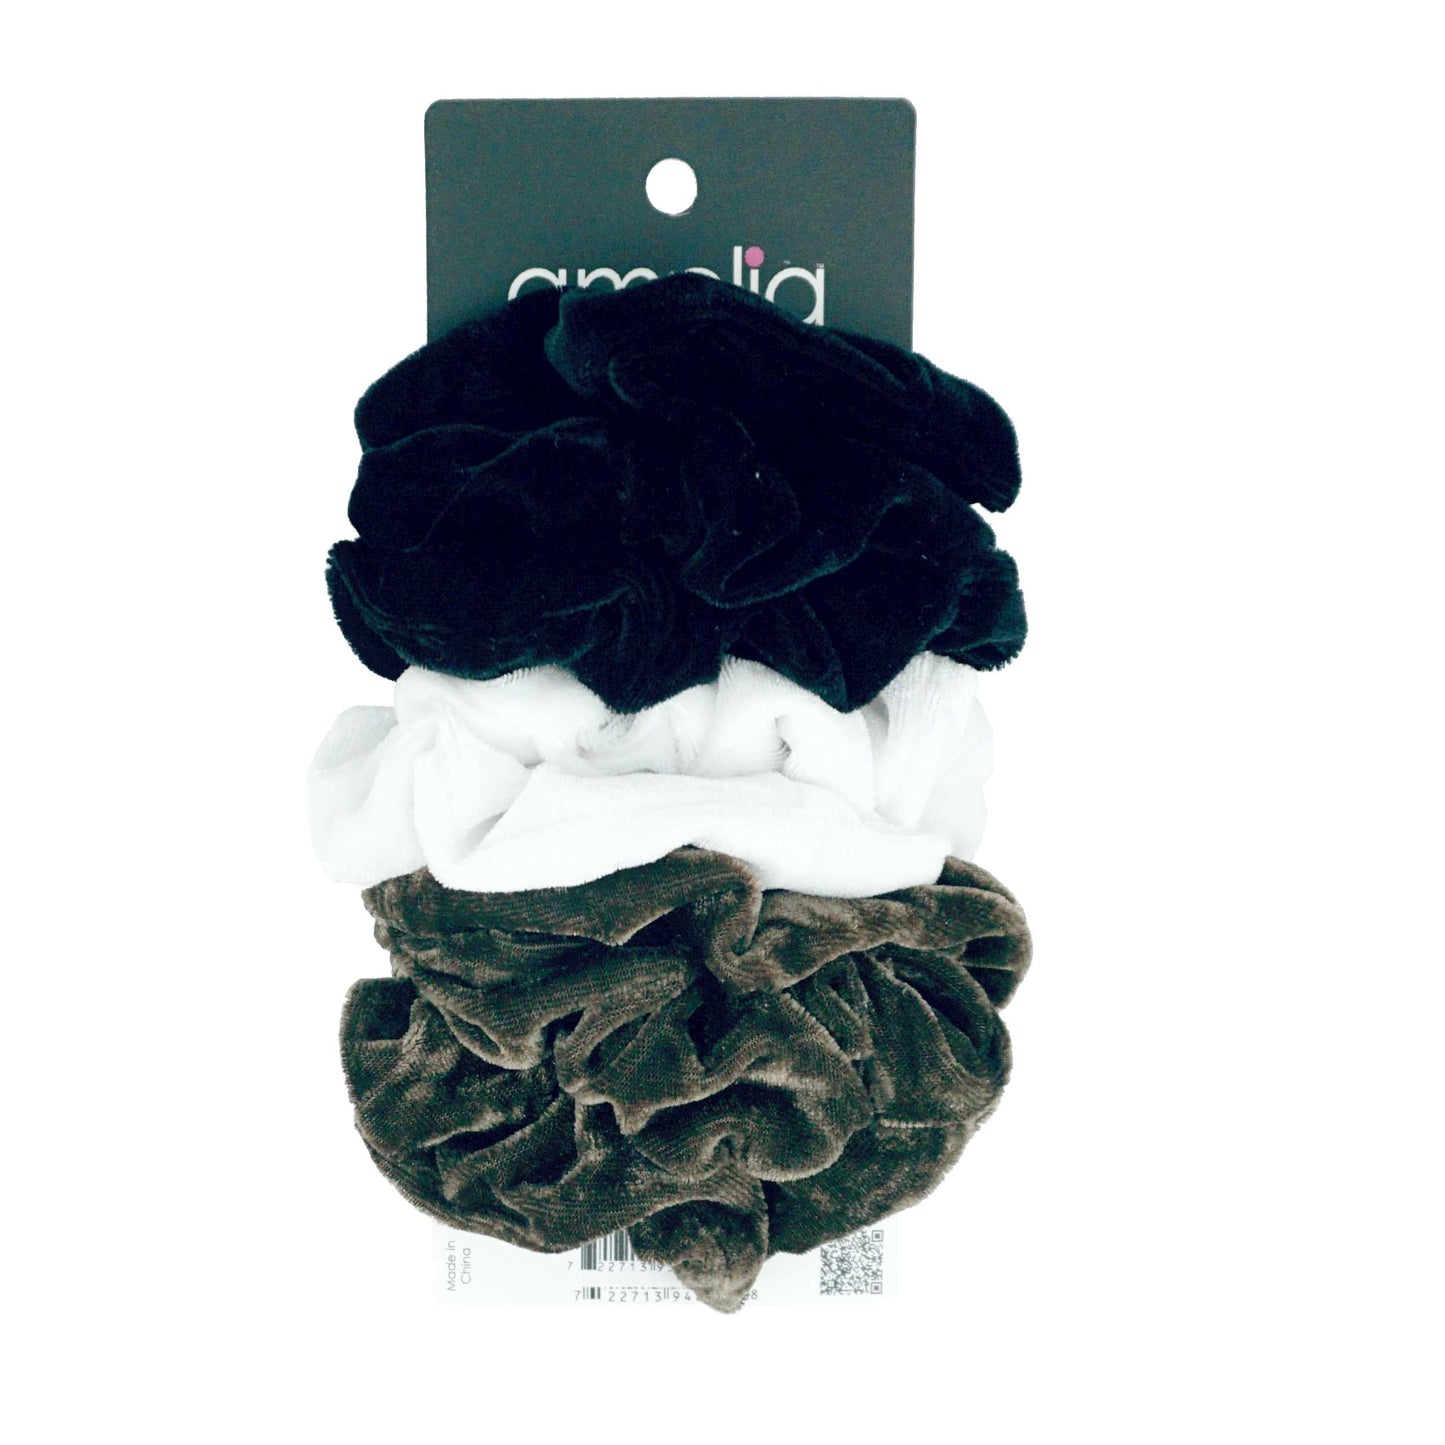 Amelia Beauty Products, Black, White and Brown Velvet Velvet Scrunchies, 3.5in Diameter, Gentle on Hair, Strong Hold, No Snag, No Dents or Creases. 8 Pack - 12 Retail Packs